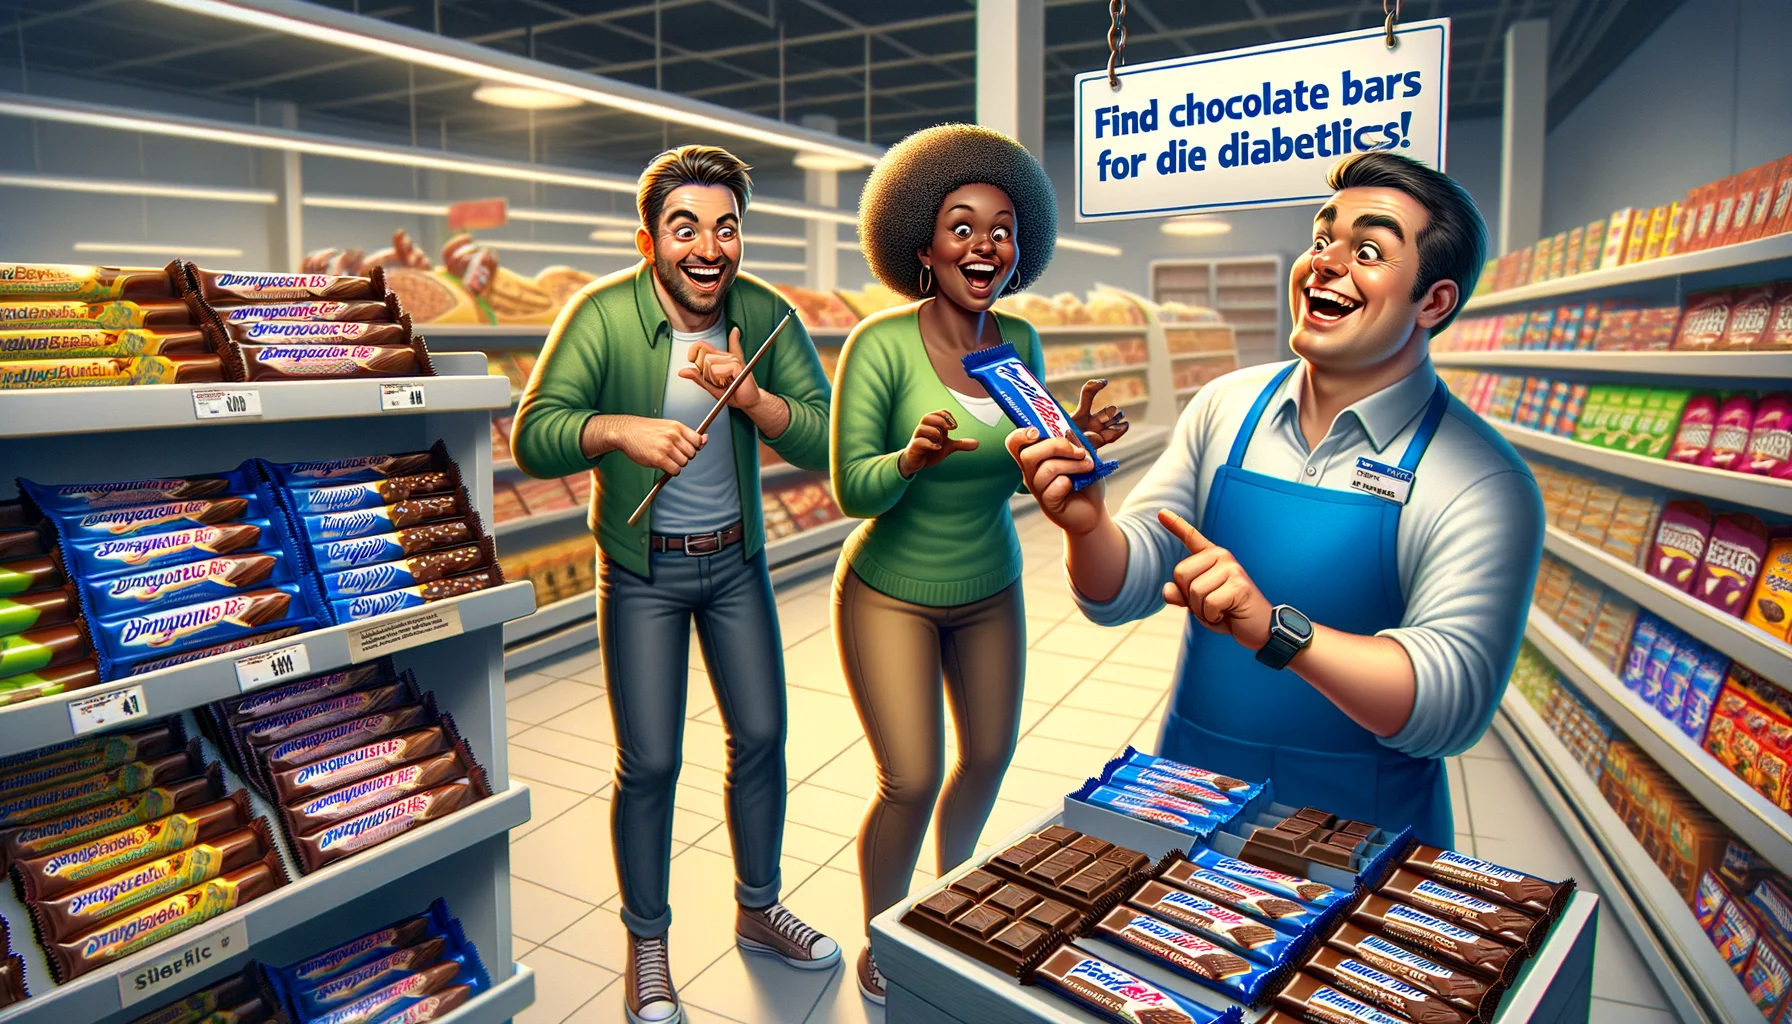 Imagine a humorous yet realistic scenario featuring three individuals in a brightly lit grocery store aisle marked as 'Healthy Treats'. A Caucasian male store manager is animatedly pointing and smiling at a stack of sugar-free chocolate bars. An African woman, standing next to a Hispanic man, is holding up a bar in excitement, while the man is checking the nutritional label with a magnifying glass, showing a surprised expression. A signboard hanging from the ceiling says 'Find Chocolate Bars for Diabetics!'. The scene depicts amusement, joy, and a sense of discovery.